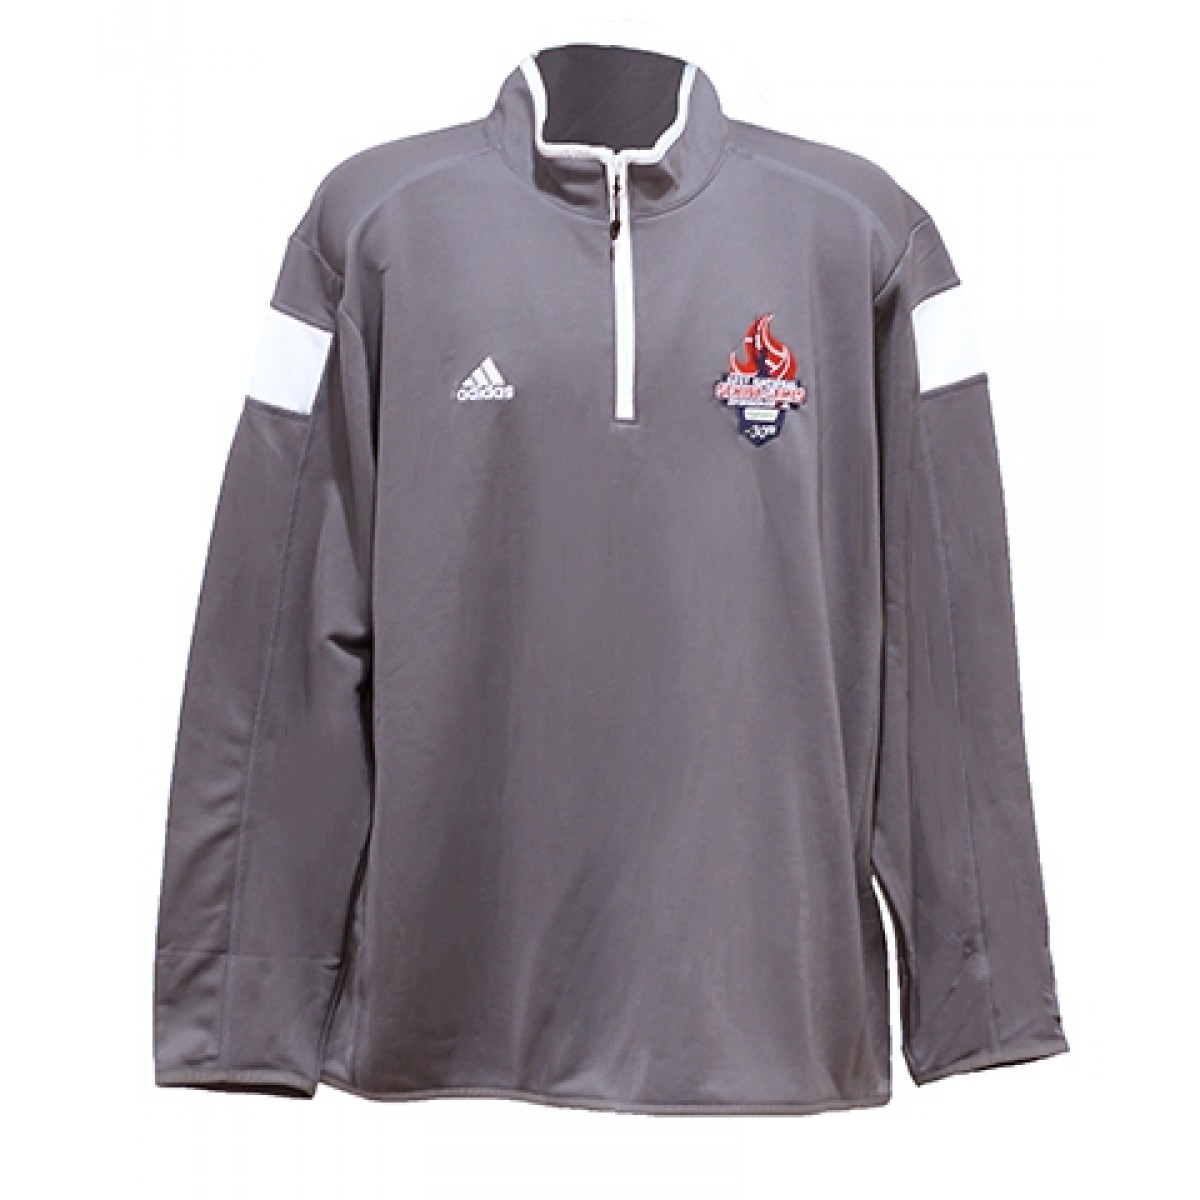 Adidas 1/4 Zip Pullover w/ Embroidered Logo